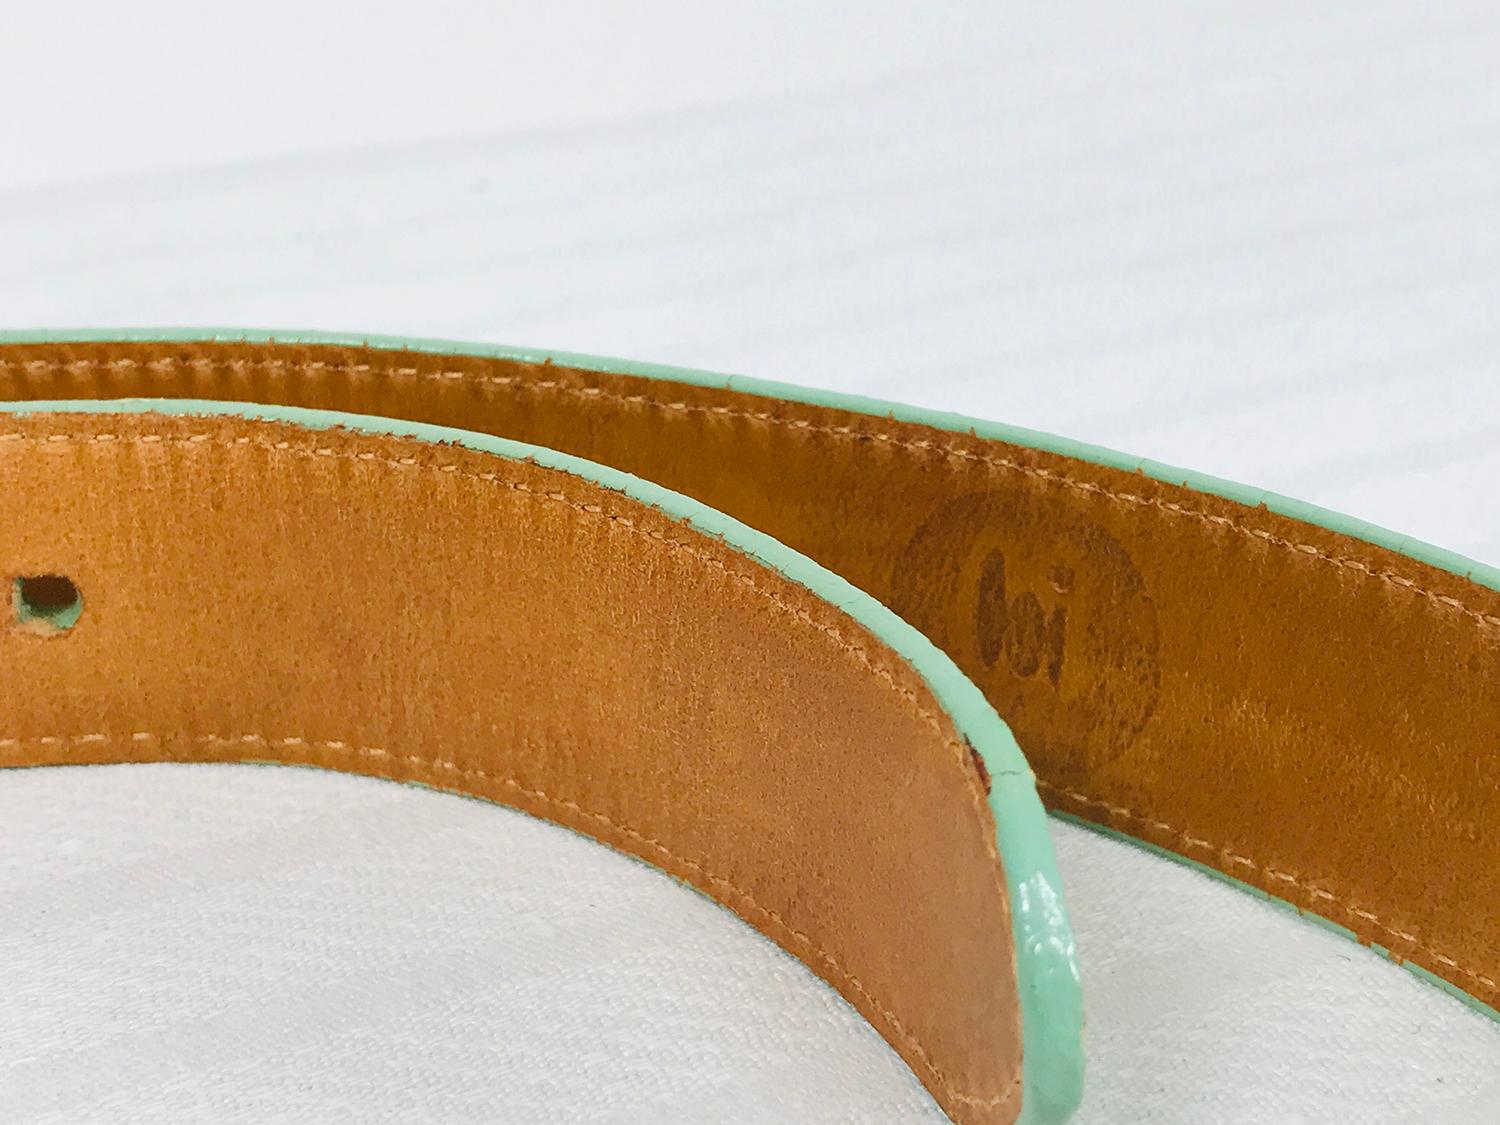 Lai green lizard belt with silver green enamel and silver metal buckle, lined in tan leather, marked size medium. In very good pre owned condition.
Measurements are in inches:
Buckle 1 1/4 x 1 1/4
Belt strap only 36 1/2
Belt width 1